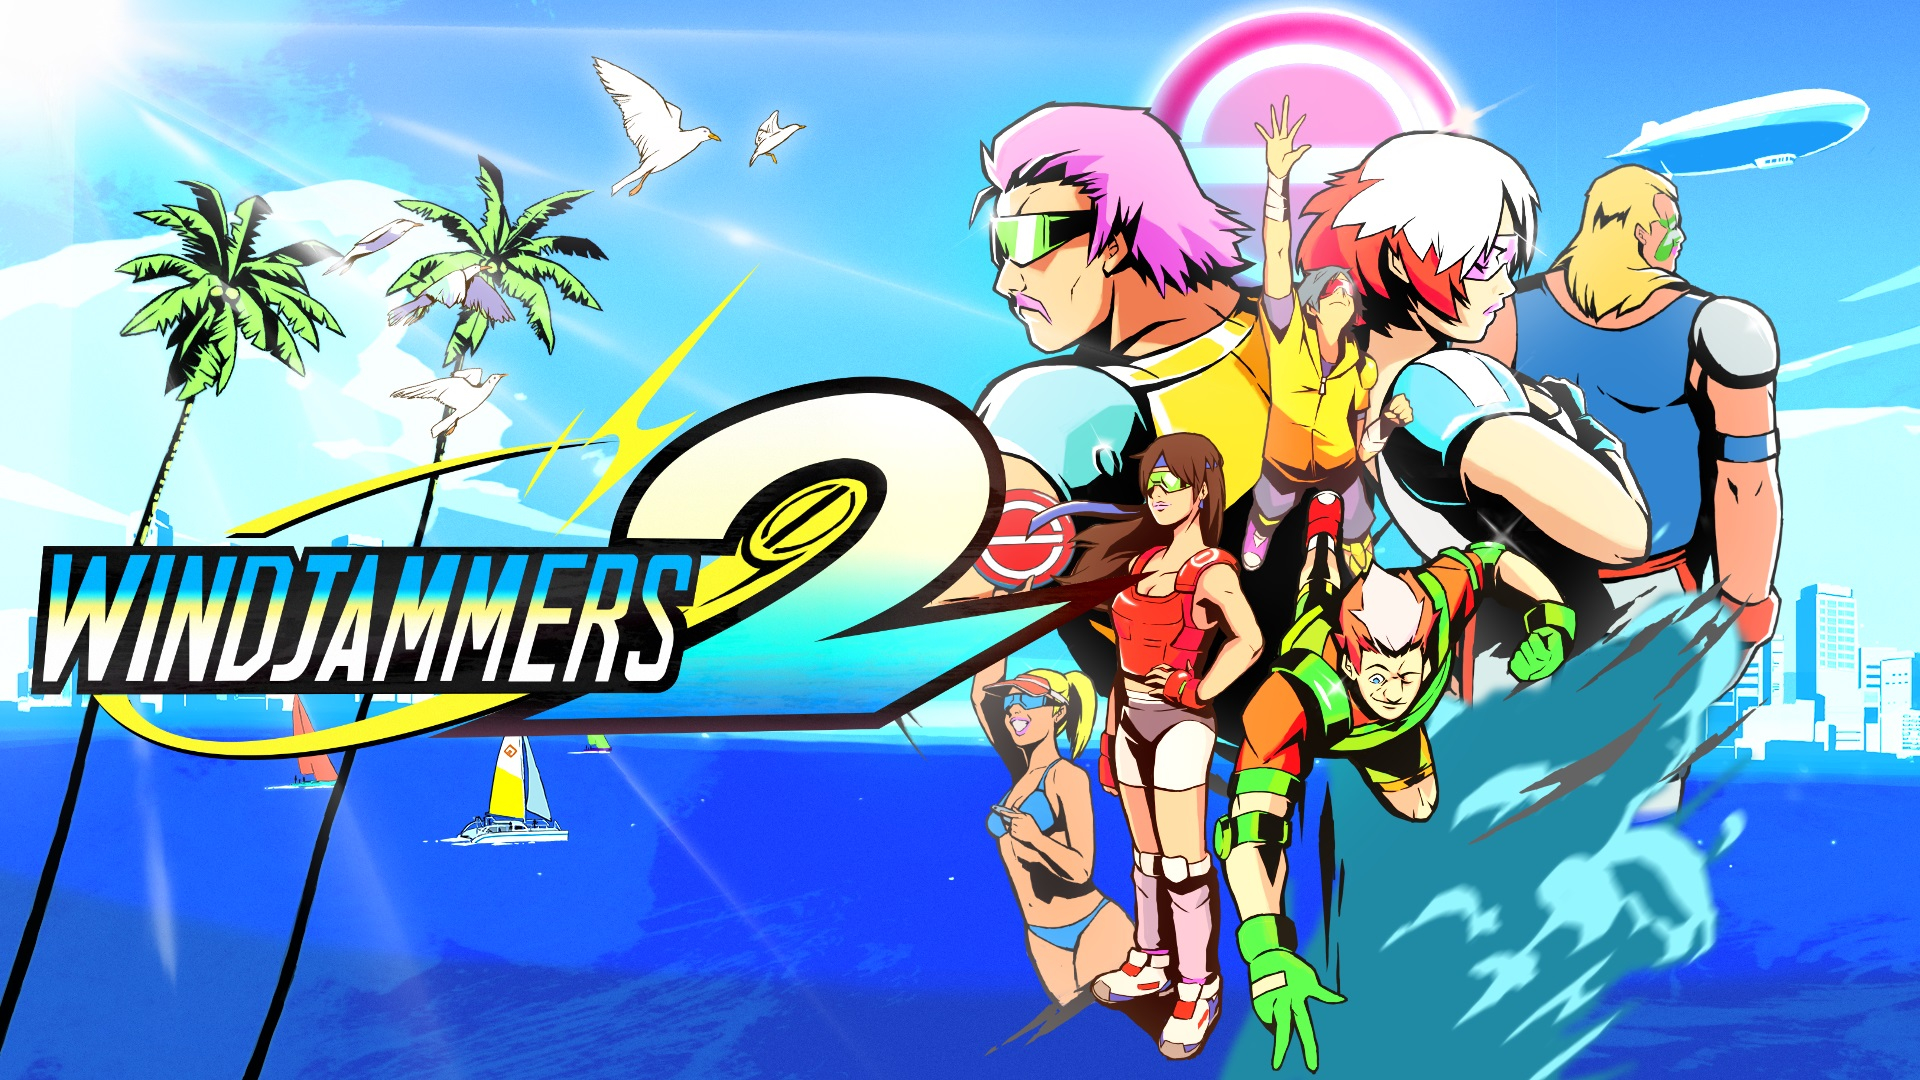   Windjammers 2   Xbox One   Xbox Game Pass